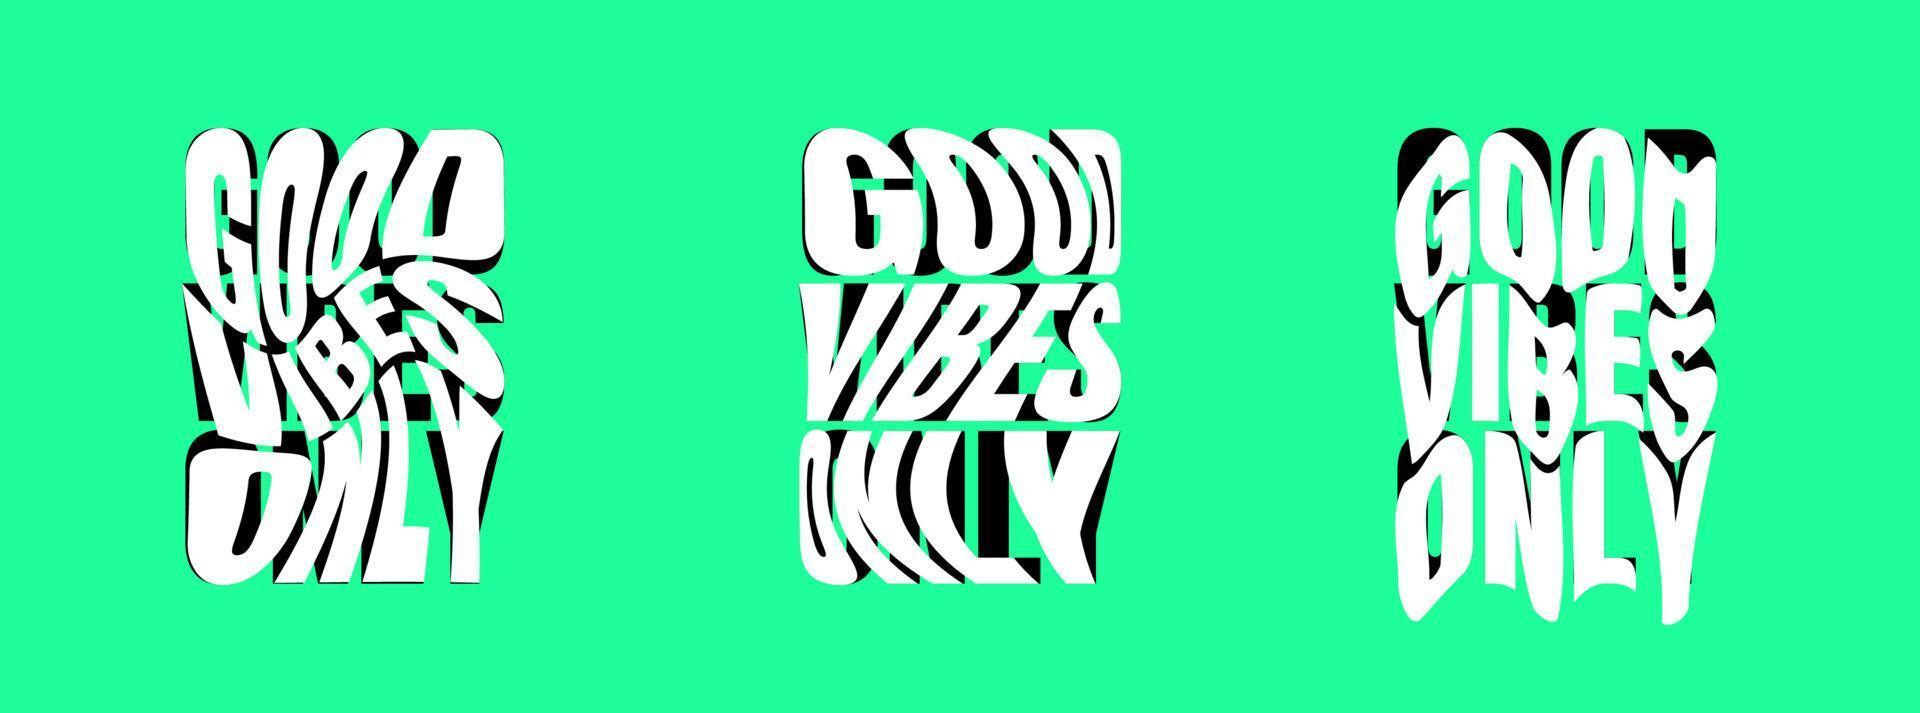 Good vibes only psychedelic lettering logo set. Hippie crazy style sticker collection. Groovy vibe quote hippy badge design templates. Twisted, wavy and melted y2k phrase logotype vector illustration